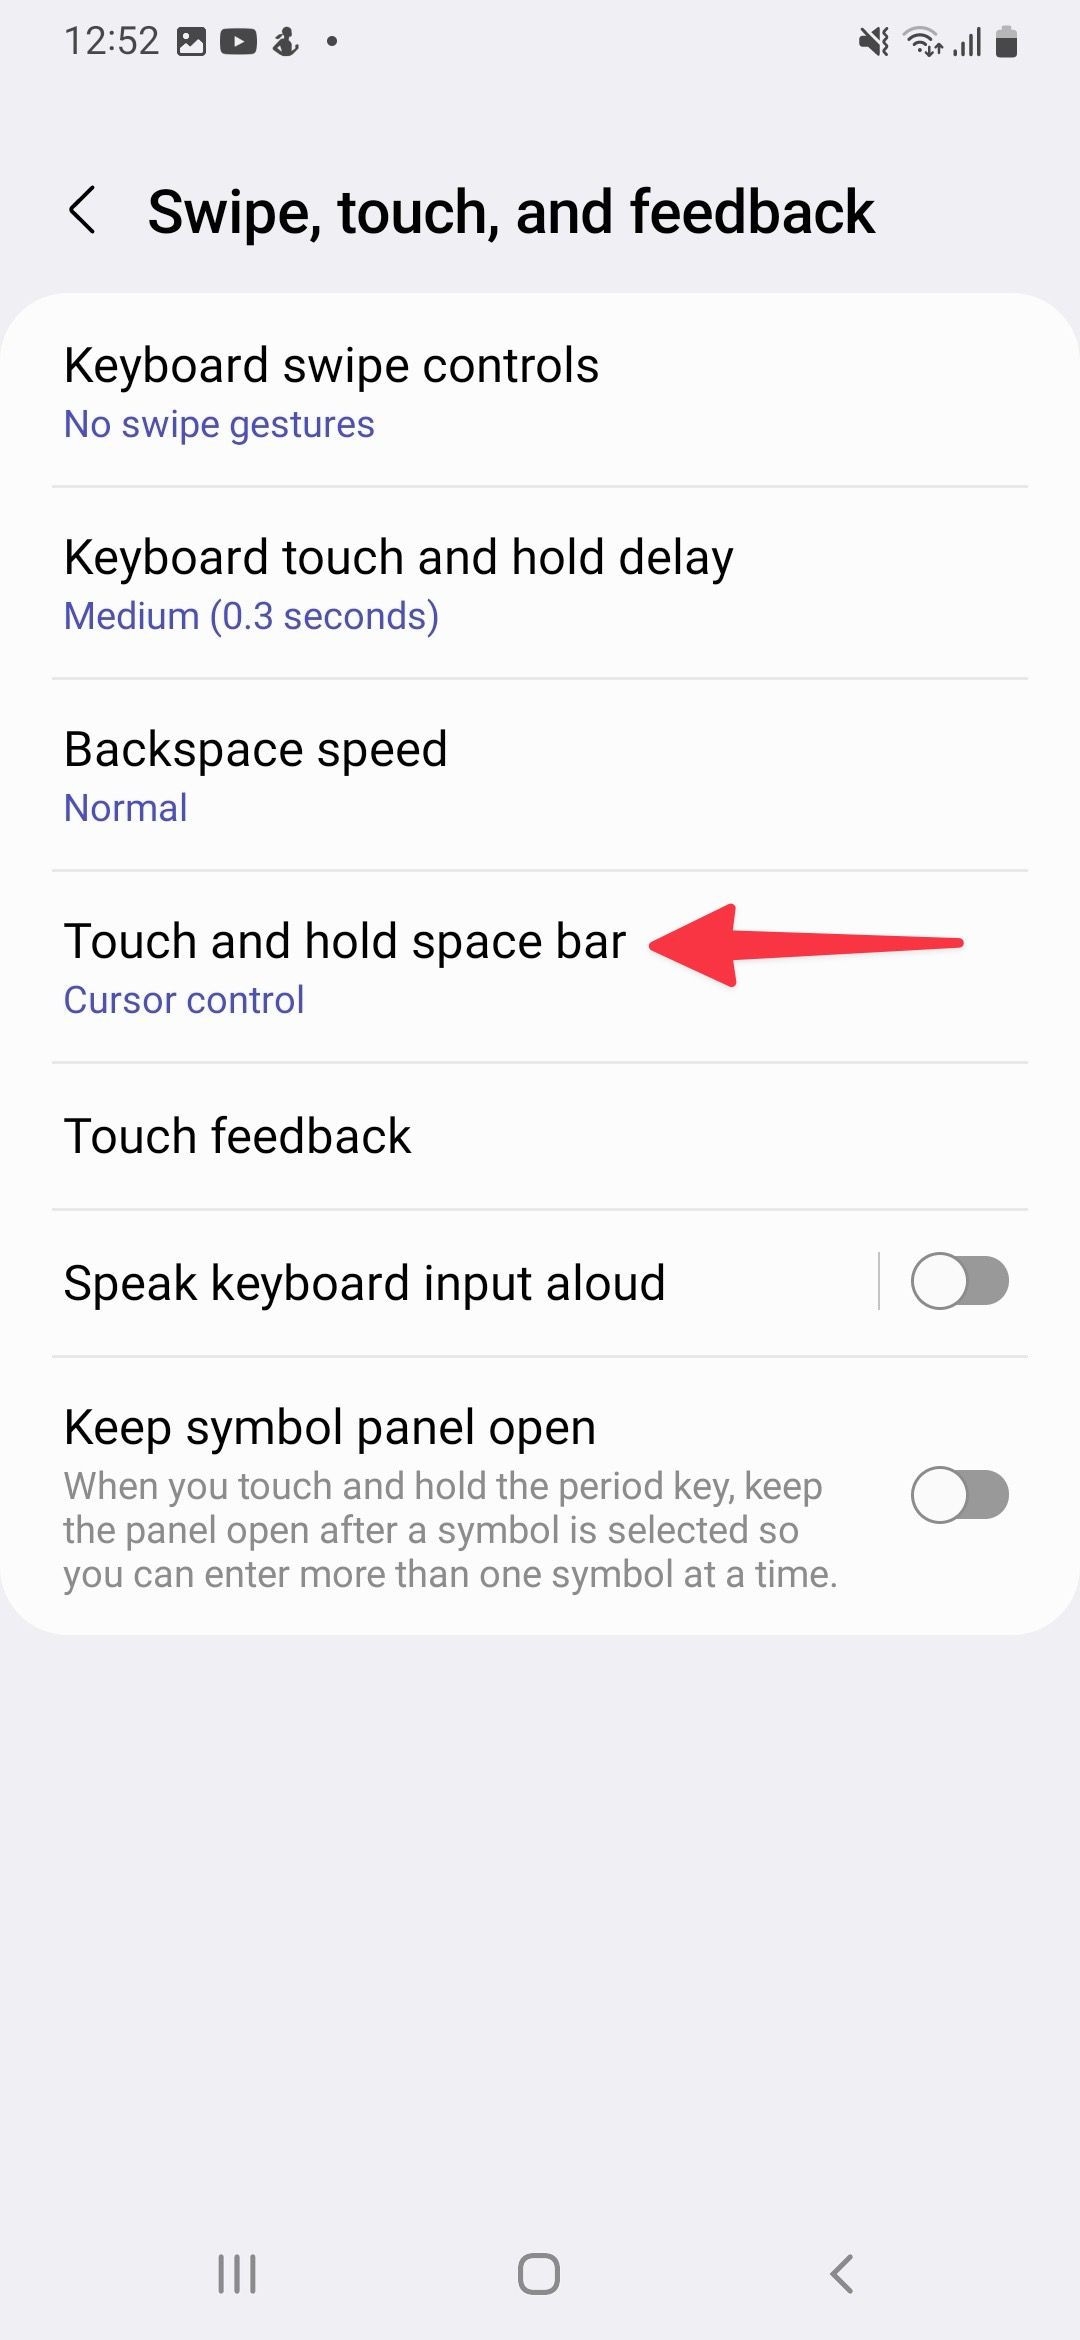 Touch and hold space bar on samsung keyboard